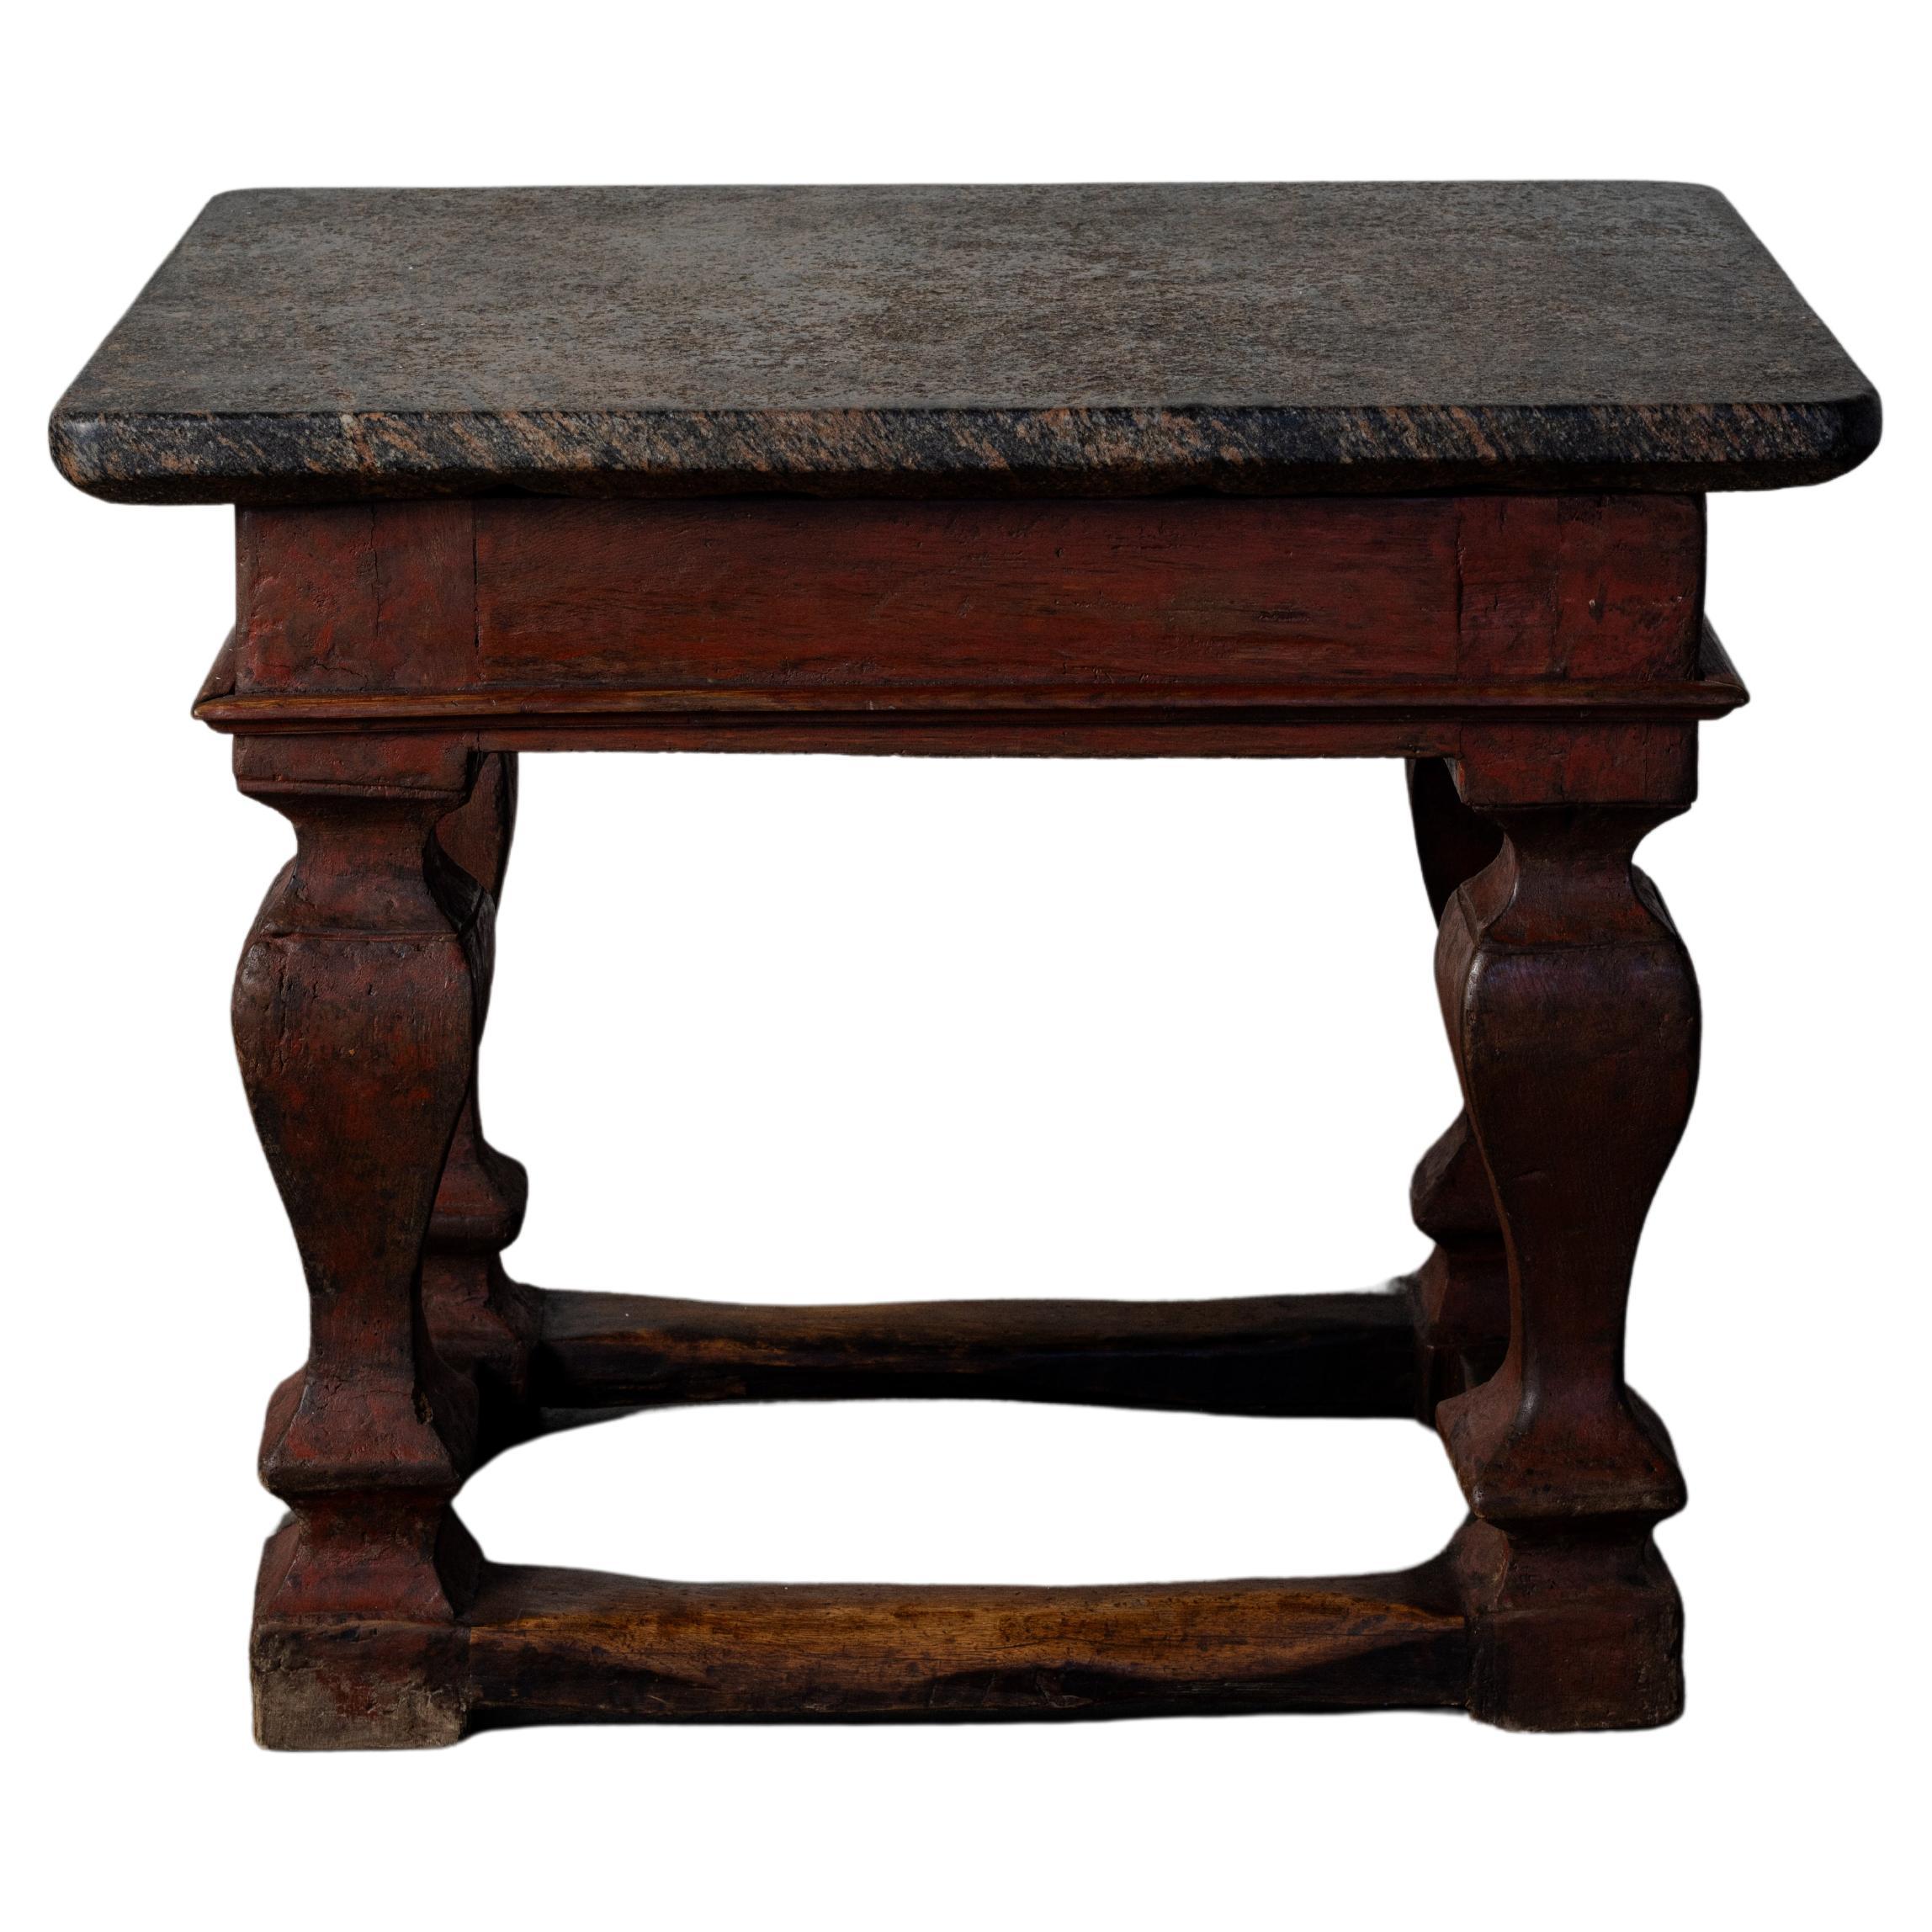 Early 19th Century Stonetop Pedestal Table For Sale